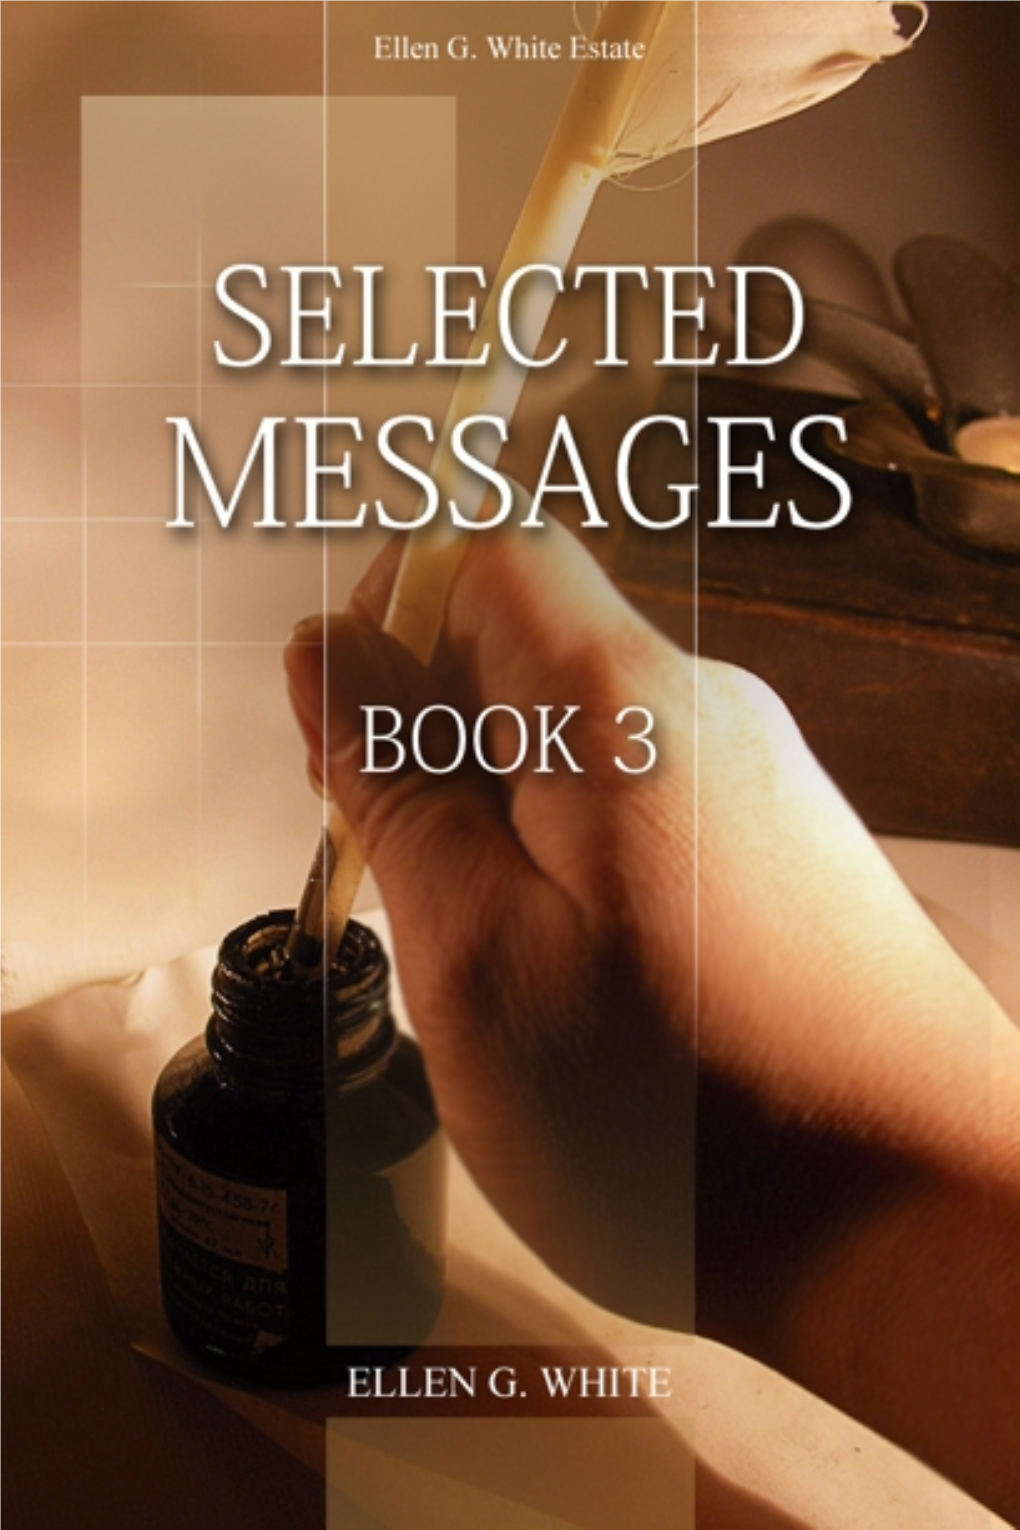 Selected Messages Book 3 (1980)